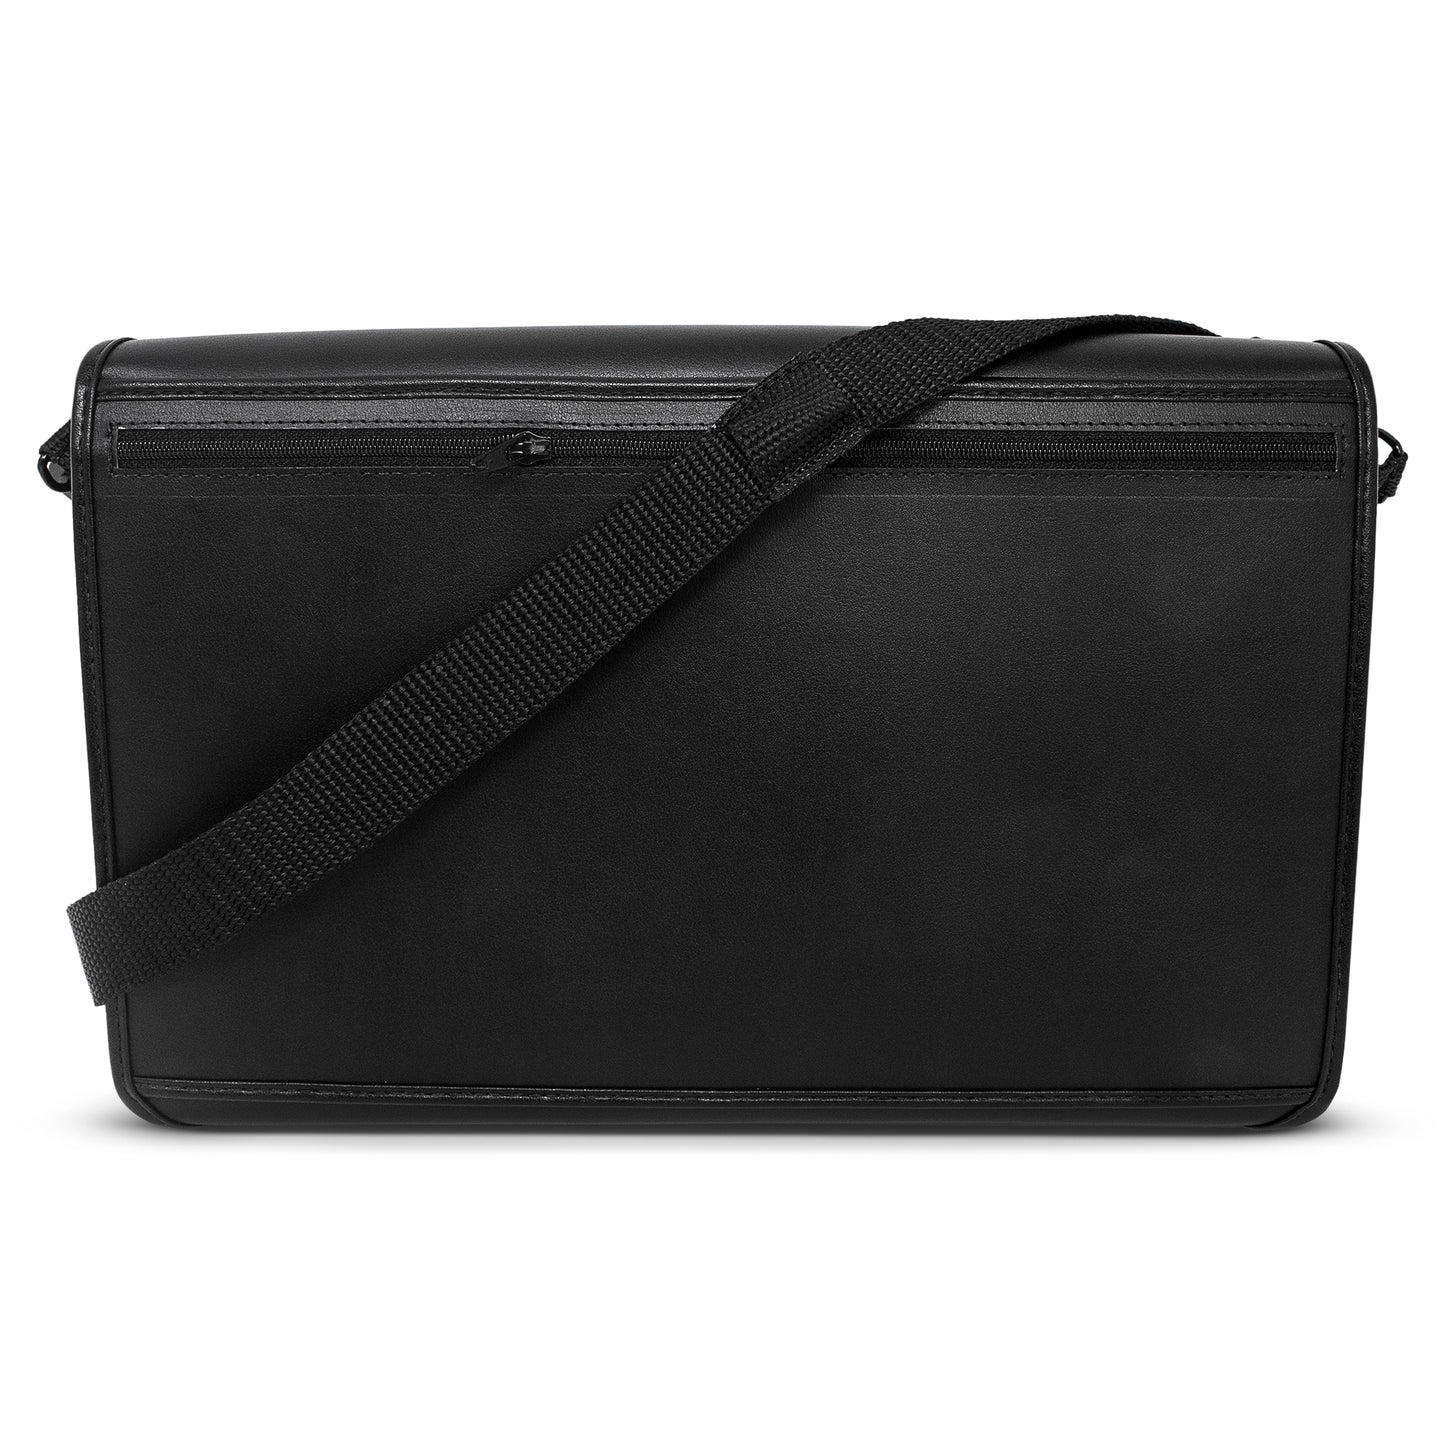 APH Mantis Q40: Fitted Black Leather Case with straps by Turtleback